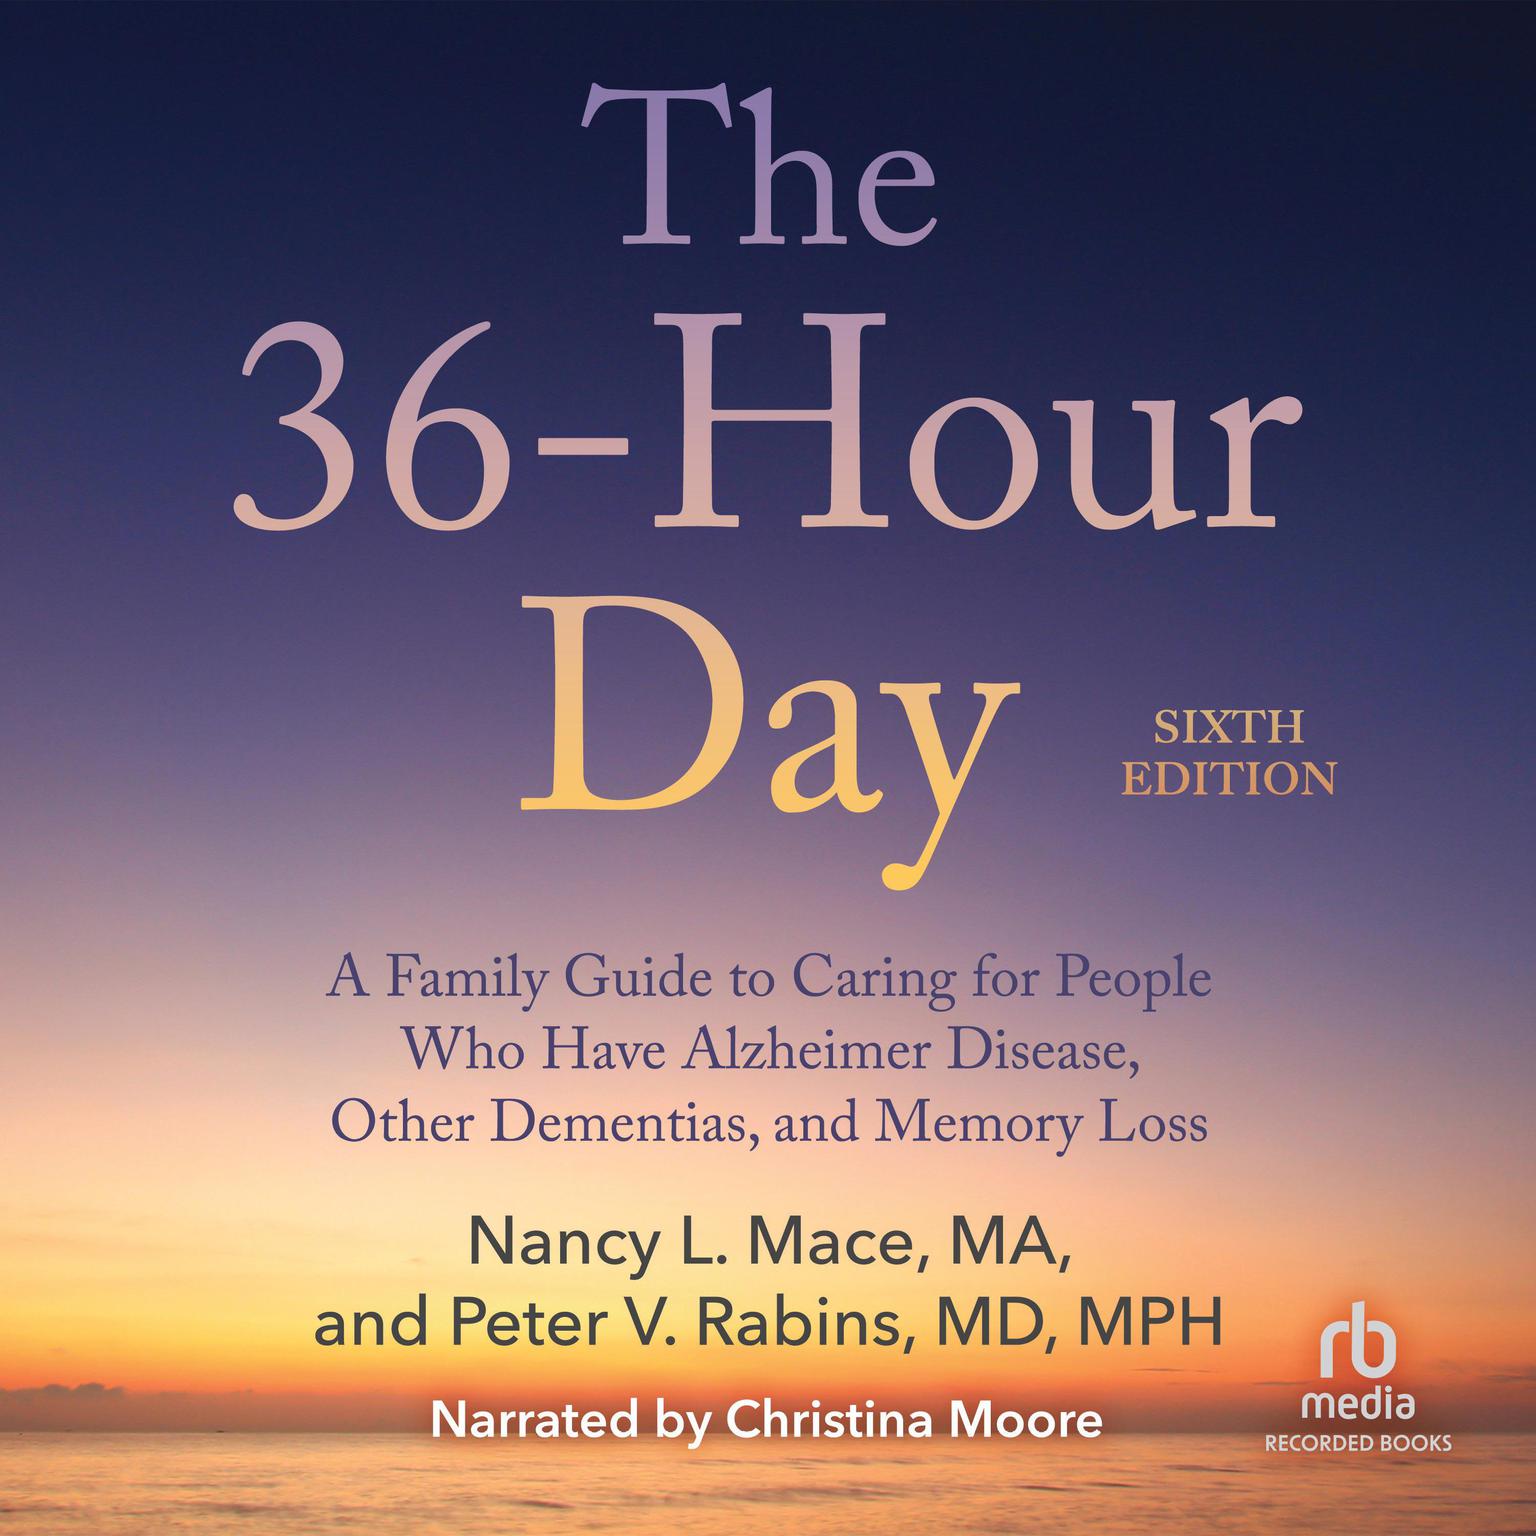 The 36-Hour Day, 6th Edition: A Family Guide to Caring For People Who Have Alzheimers Disease, Related Dementias and Memory Loss Audiobook, by Nancy L. Mace